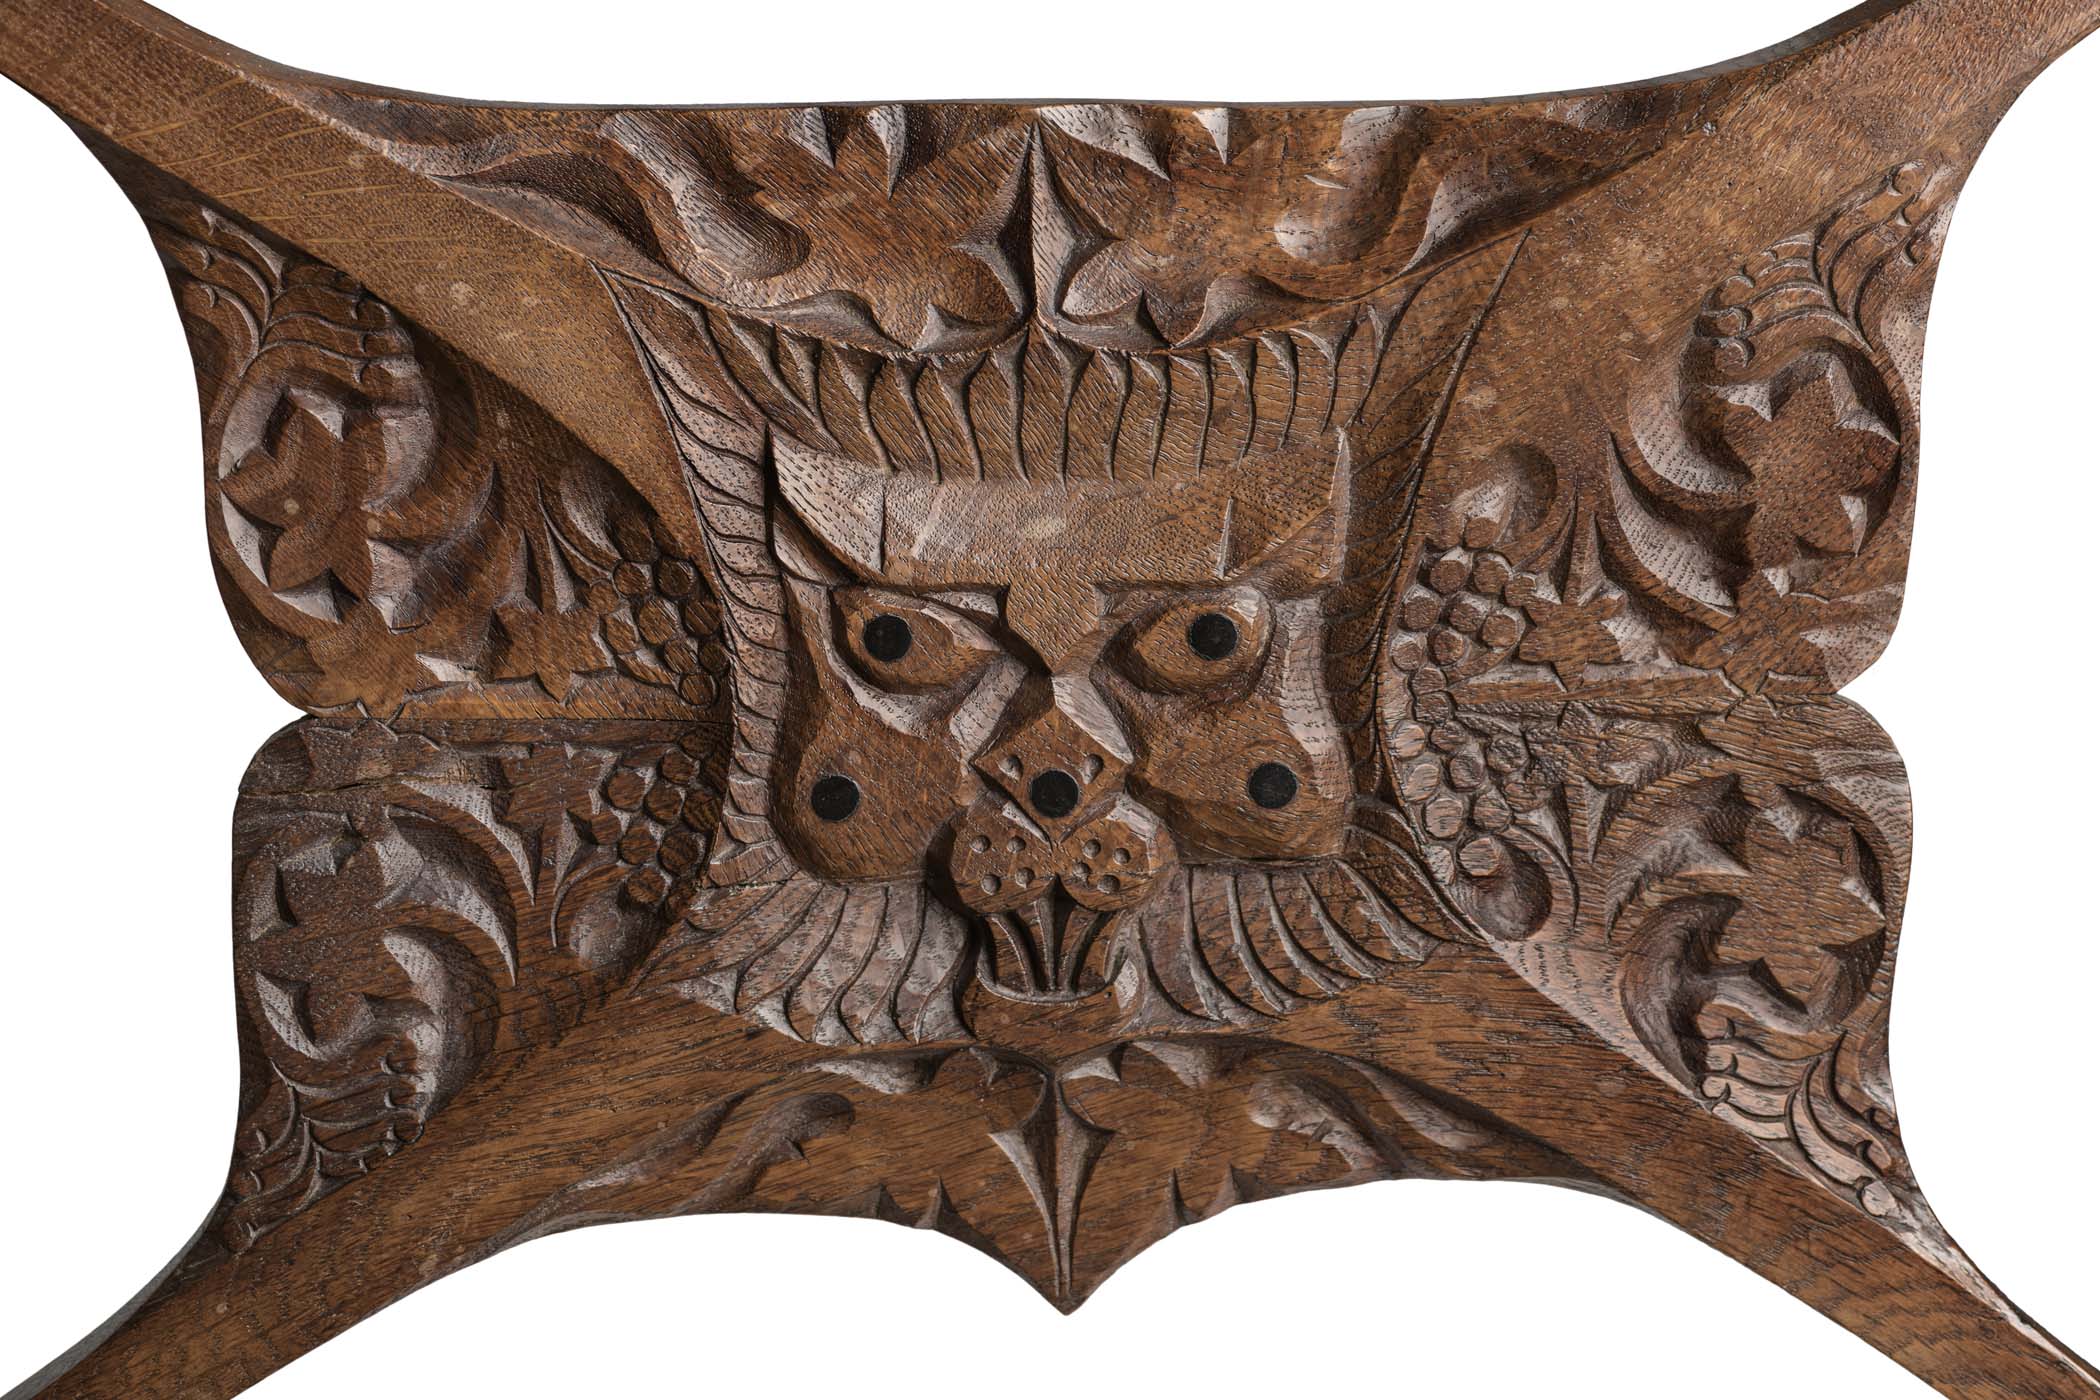 C.A. Lion Cachet, designer;  E.J. van Wisselingh & Co., maker; Portfolio Stand (top: full; bottom: detail), c. 1903, oak, Macassar ebony, walnut, brass, Los Angeles County Museum of Art, gift of Mr. and Mrs. Bruce M. Newman through the 2020 Decorative Arts and Design Acquisitions Committee (DA²) in memory of Peter Loughrey, photos © Museum Associates/LACMA